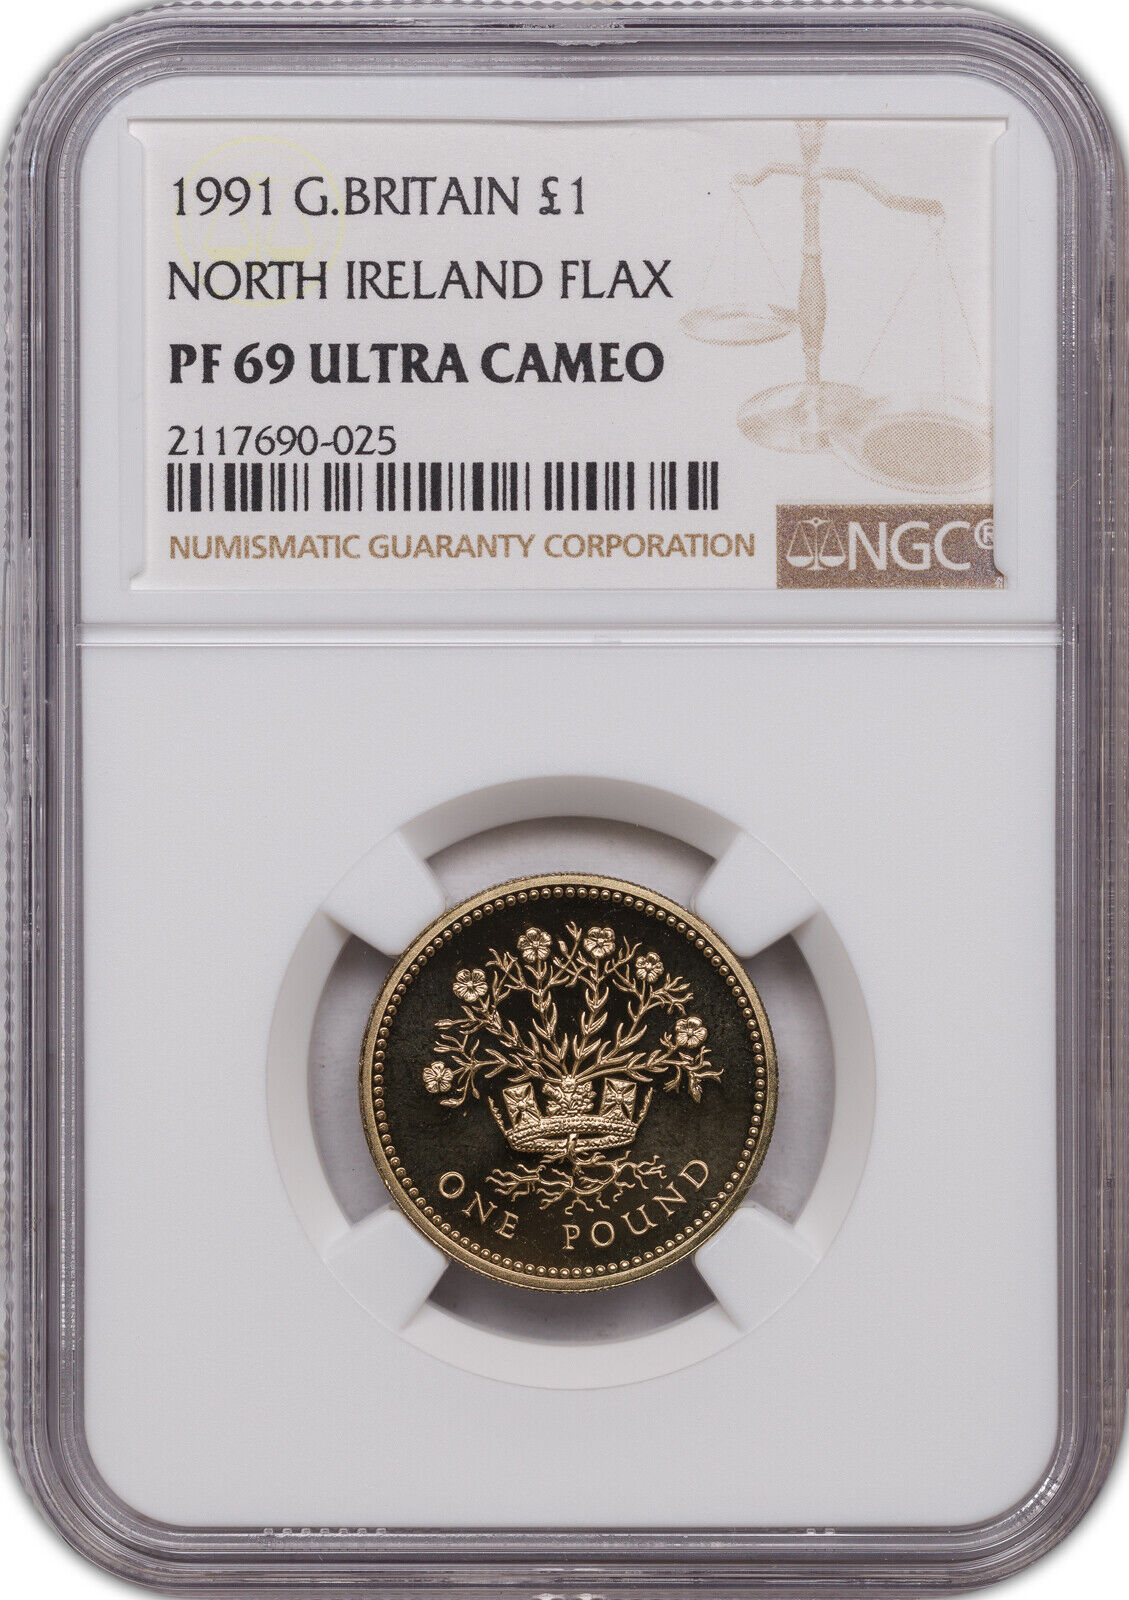 1991 Great Britg.britain 1 Pound North Ireland Flax Pf 69 Uc Ngc 1 Graded Higher